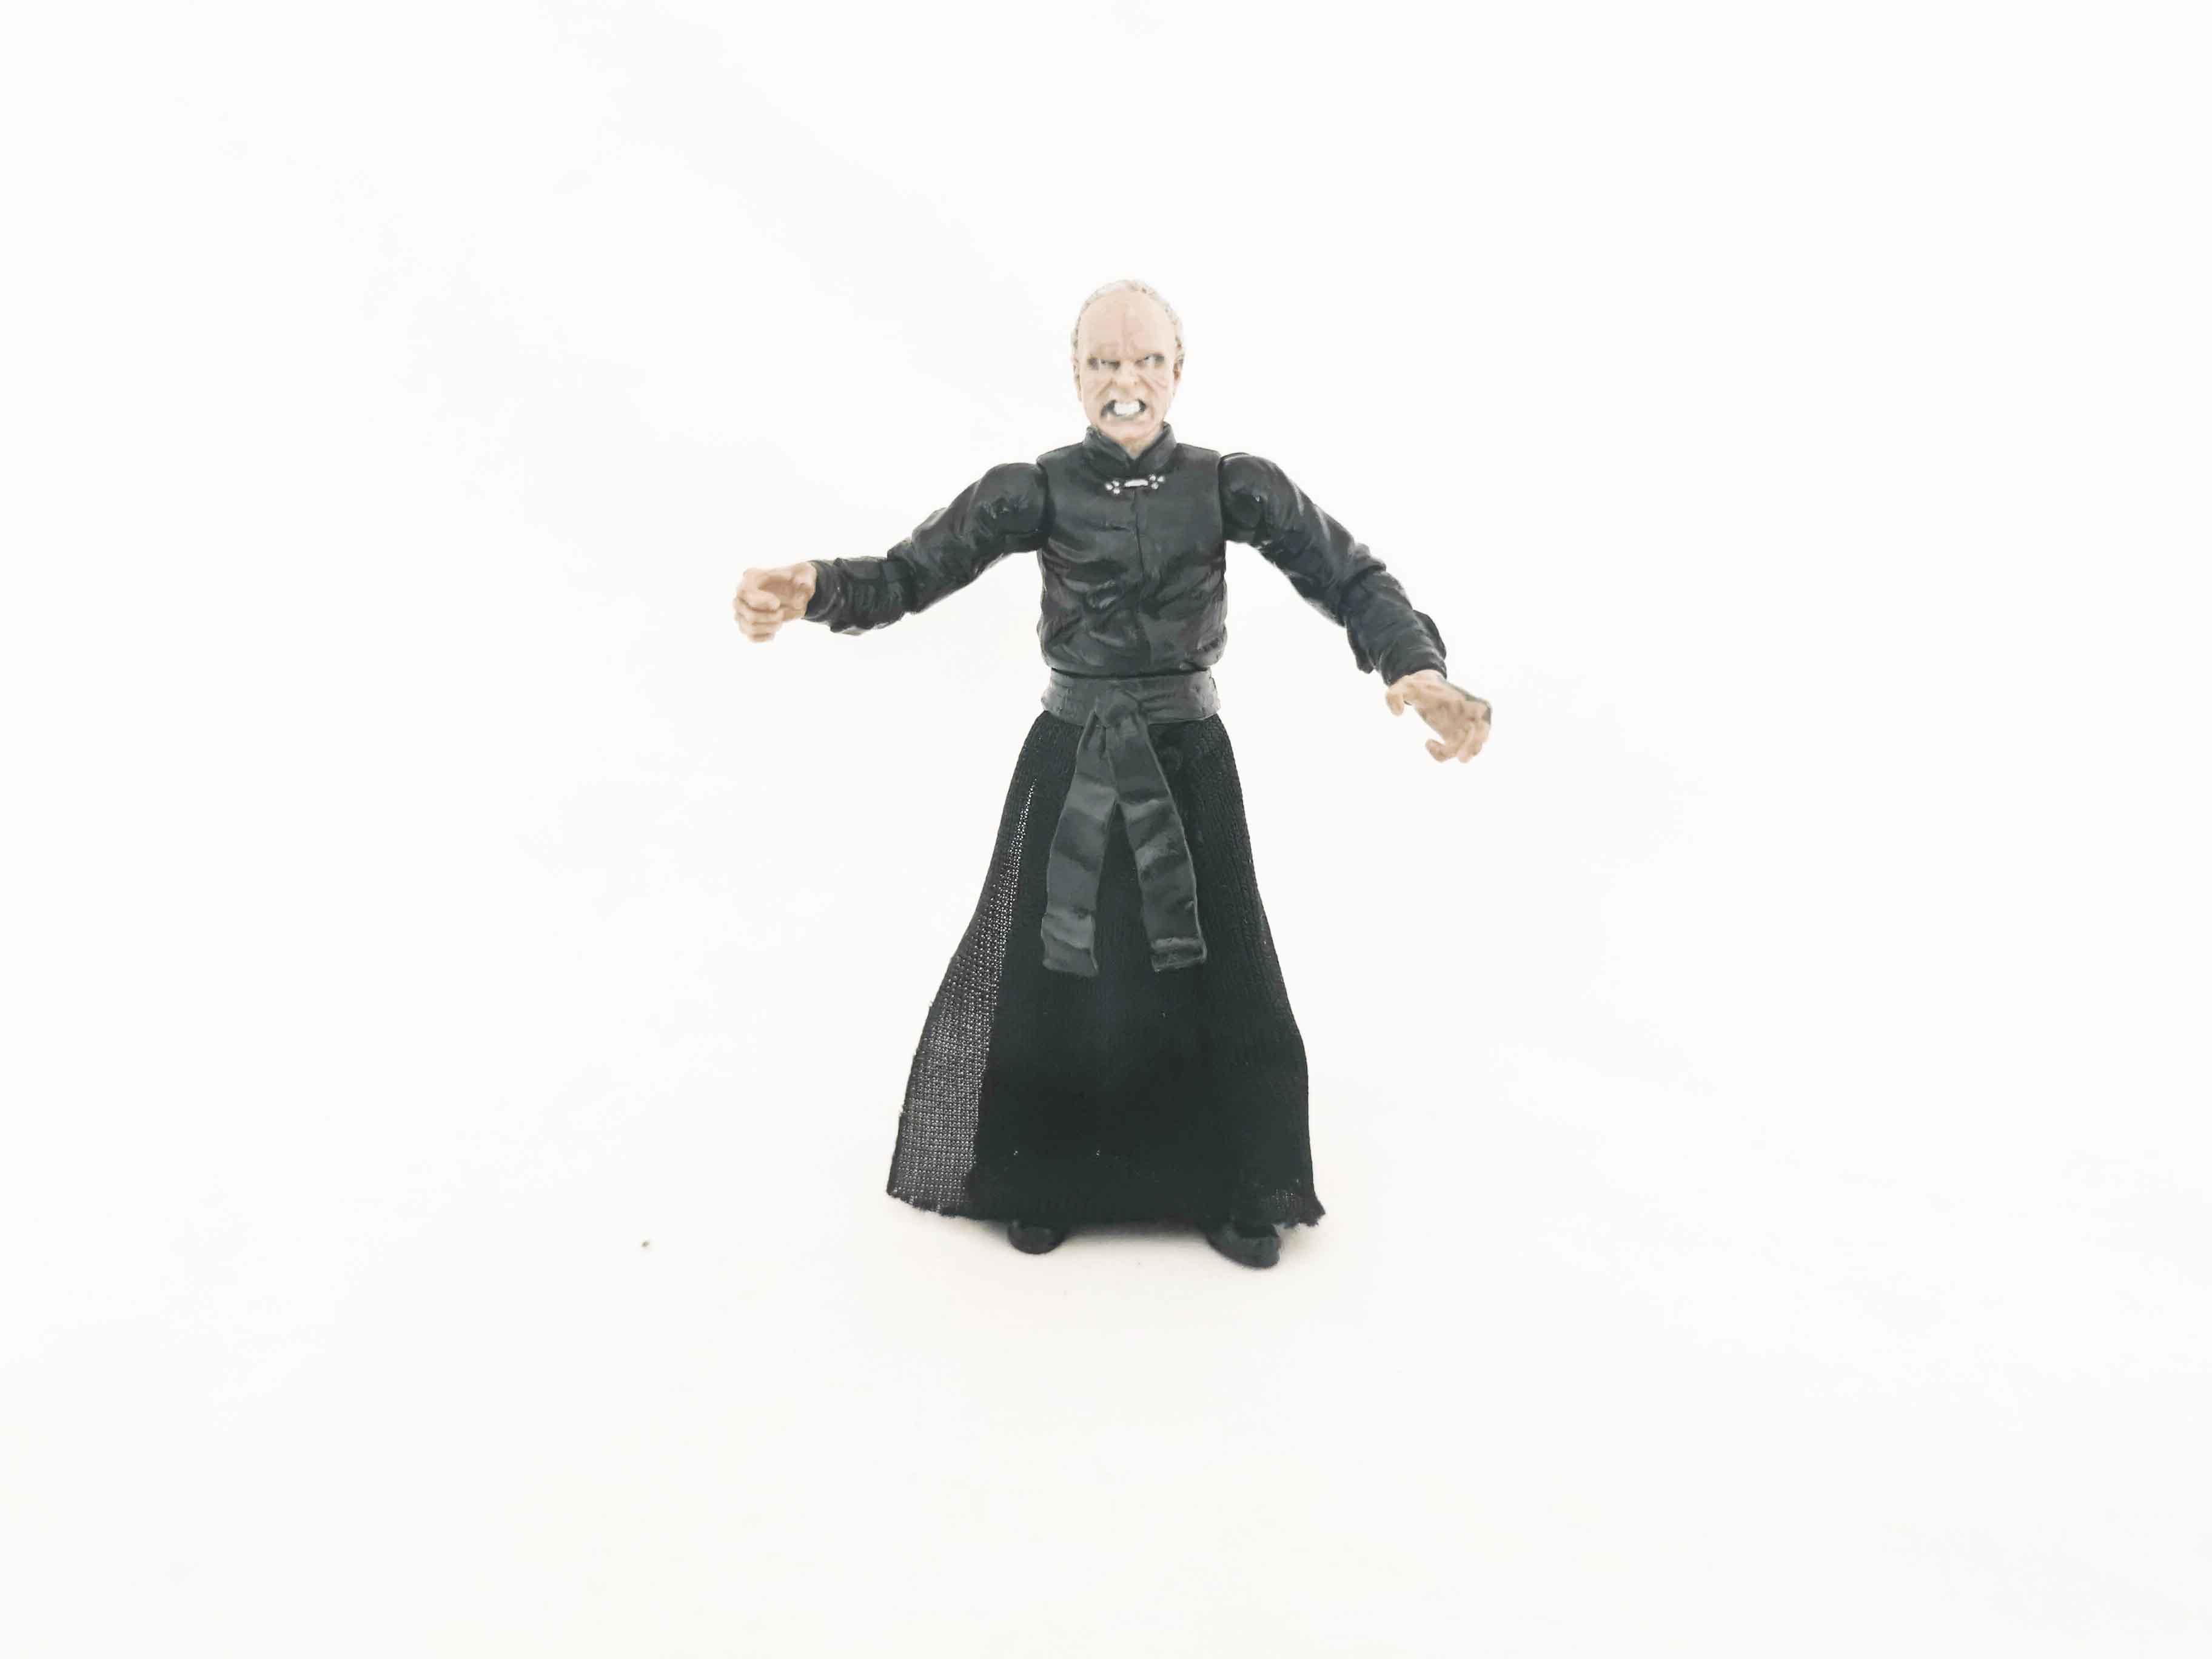 Emporer Palpatine Darth Sidious Star Wars 3.75 Action Figure The Return Of the Jedi